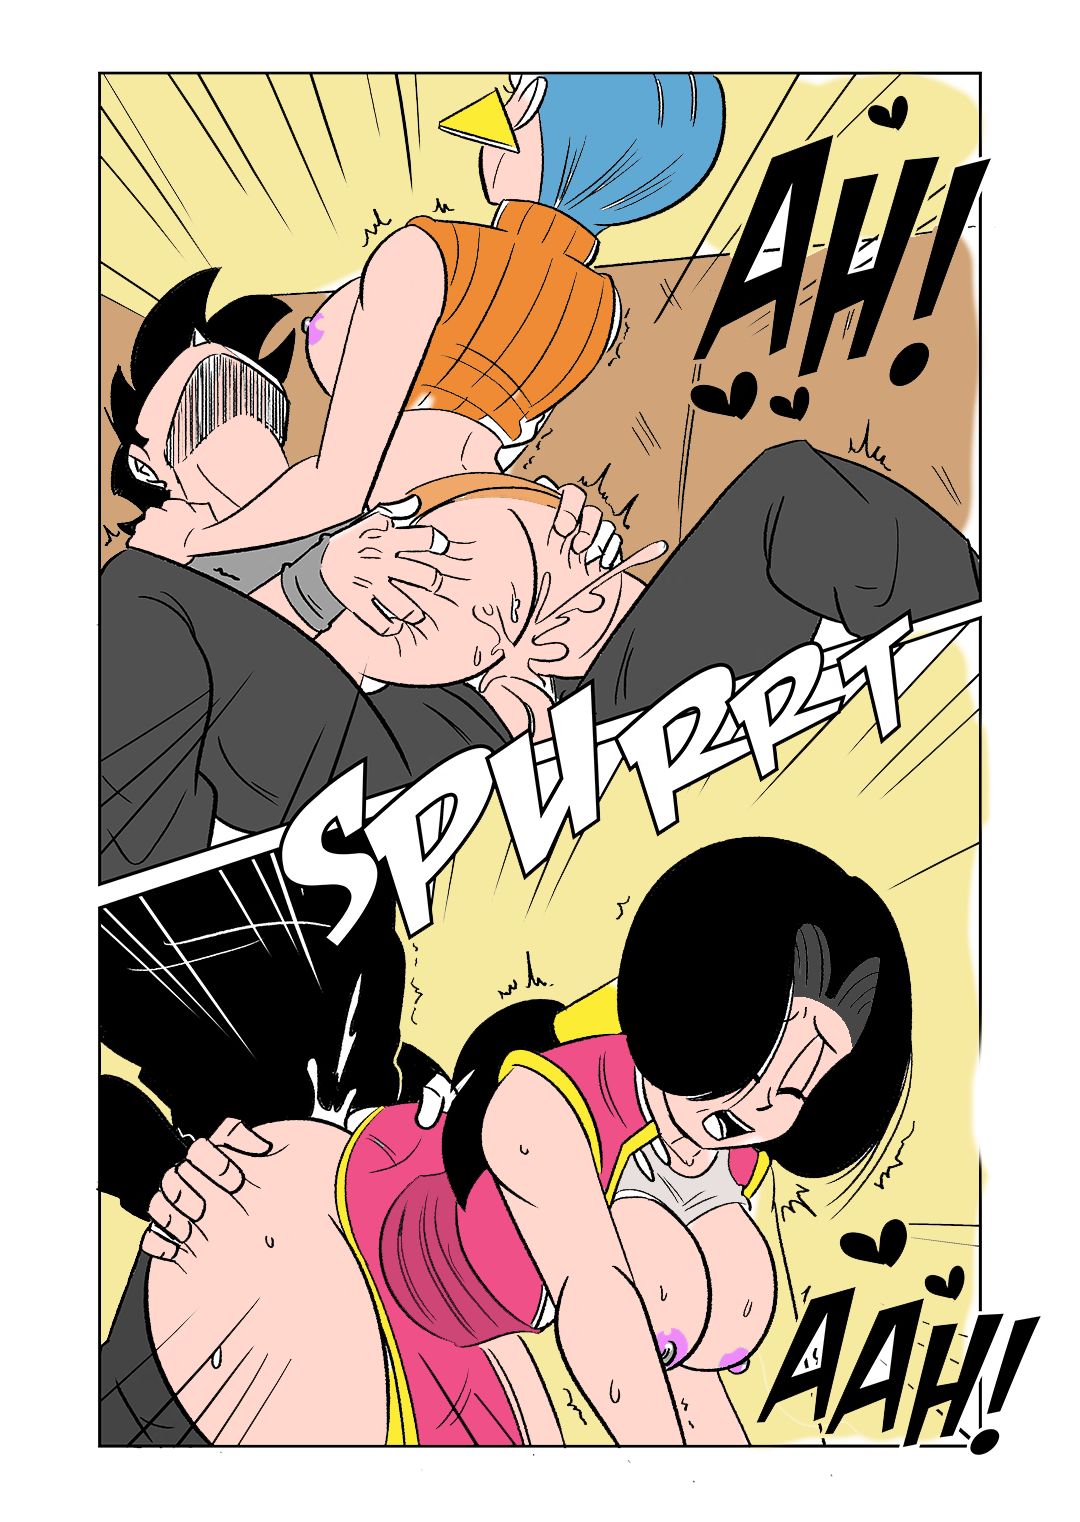 The Switch Up (Dragon Ball Z) by Funsexydb page 23